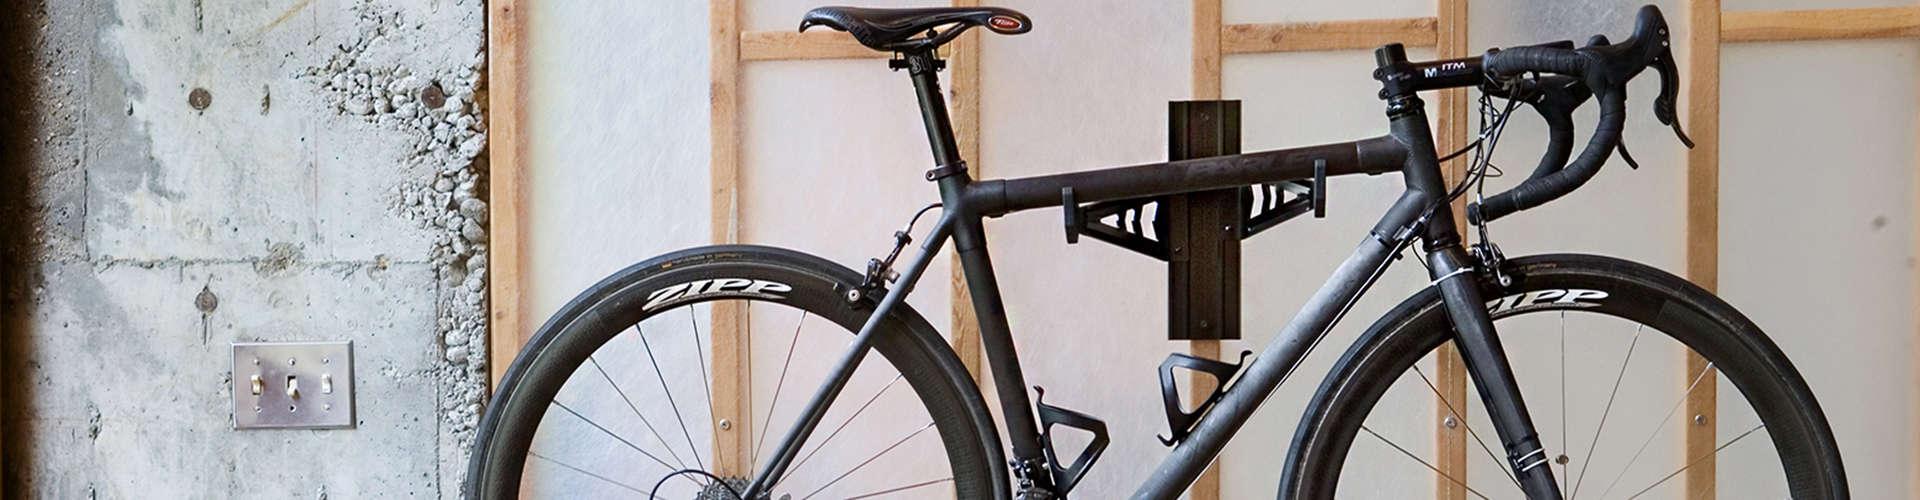 An image of a wall mounted bike storage cradle.